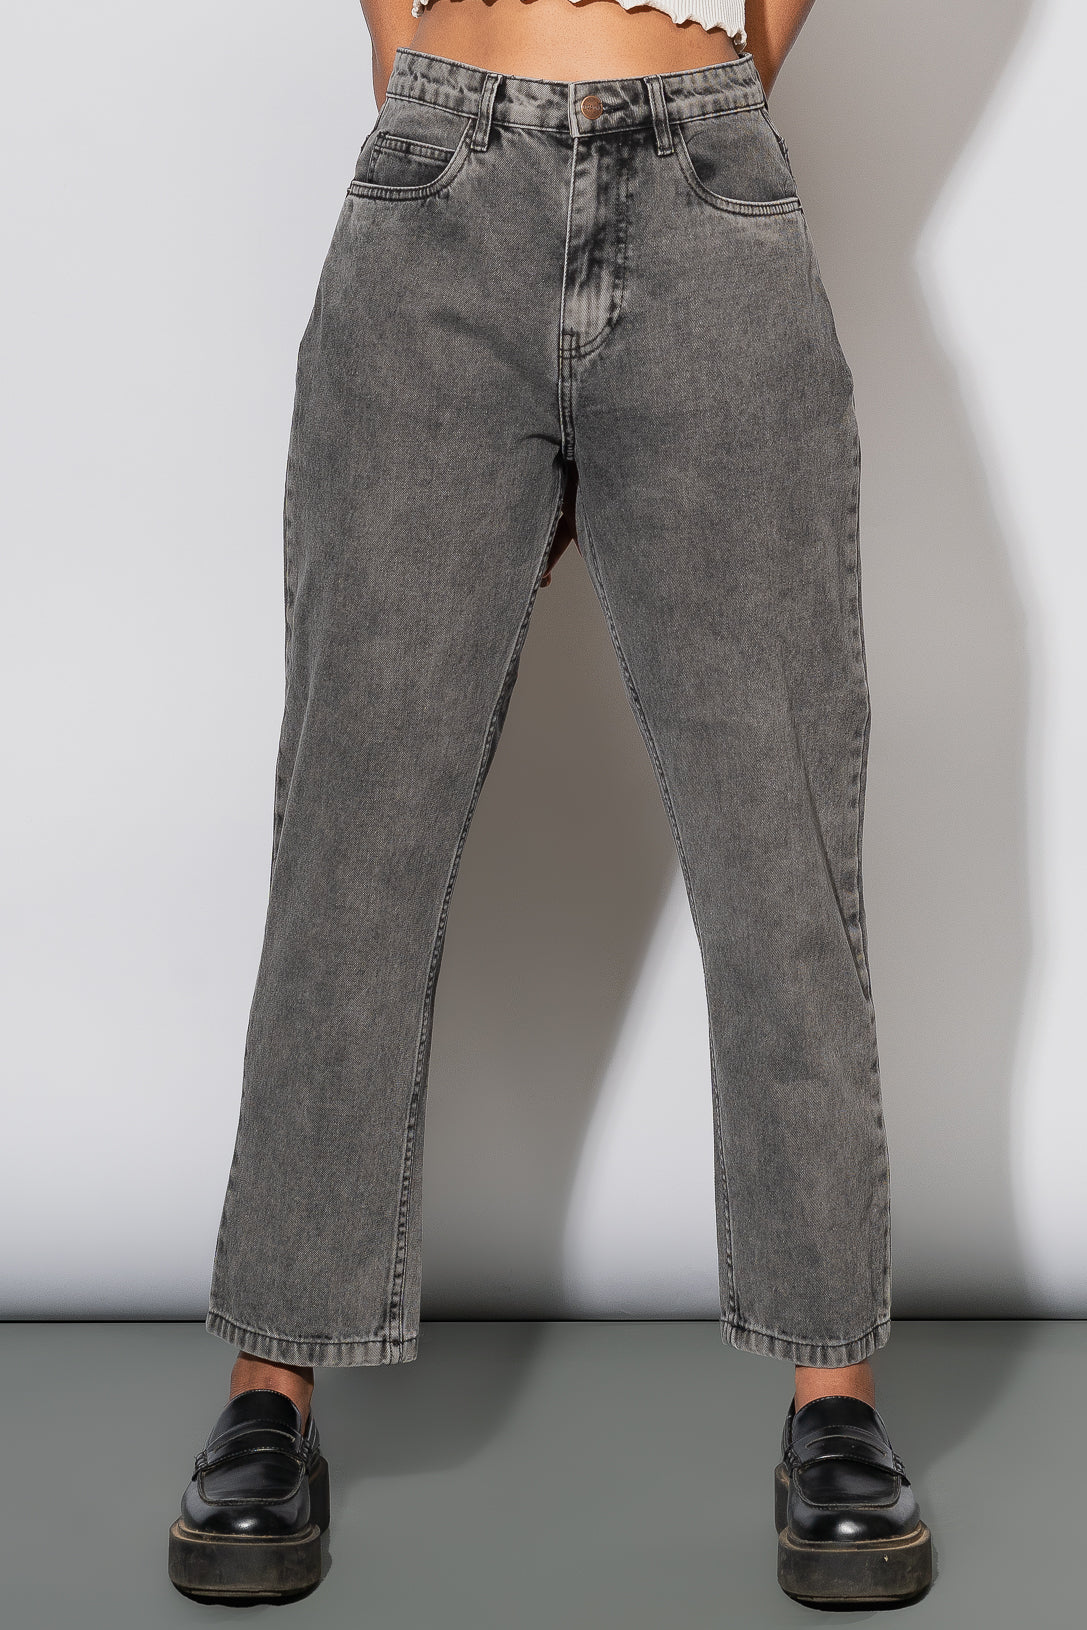 Women's Washed Out High Waisted Denim Jeggings